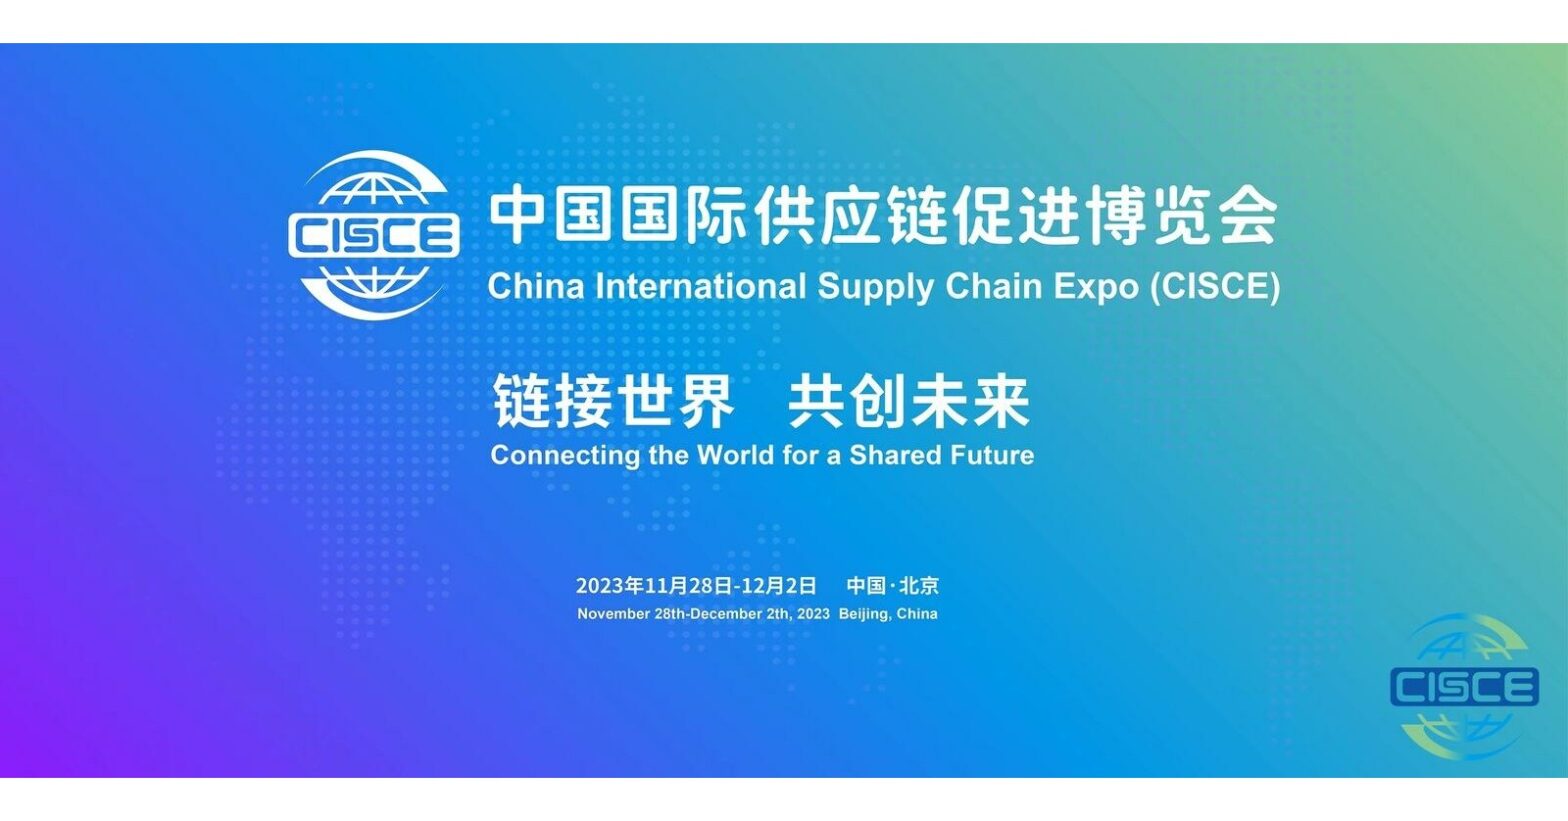 First China International Supply Chain Expo being organize from November 28